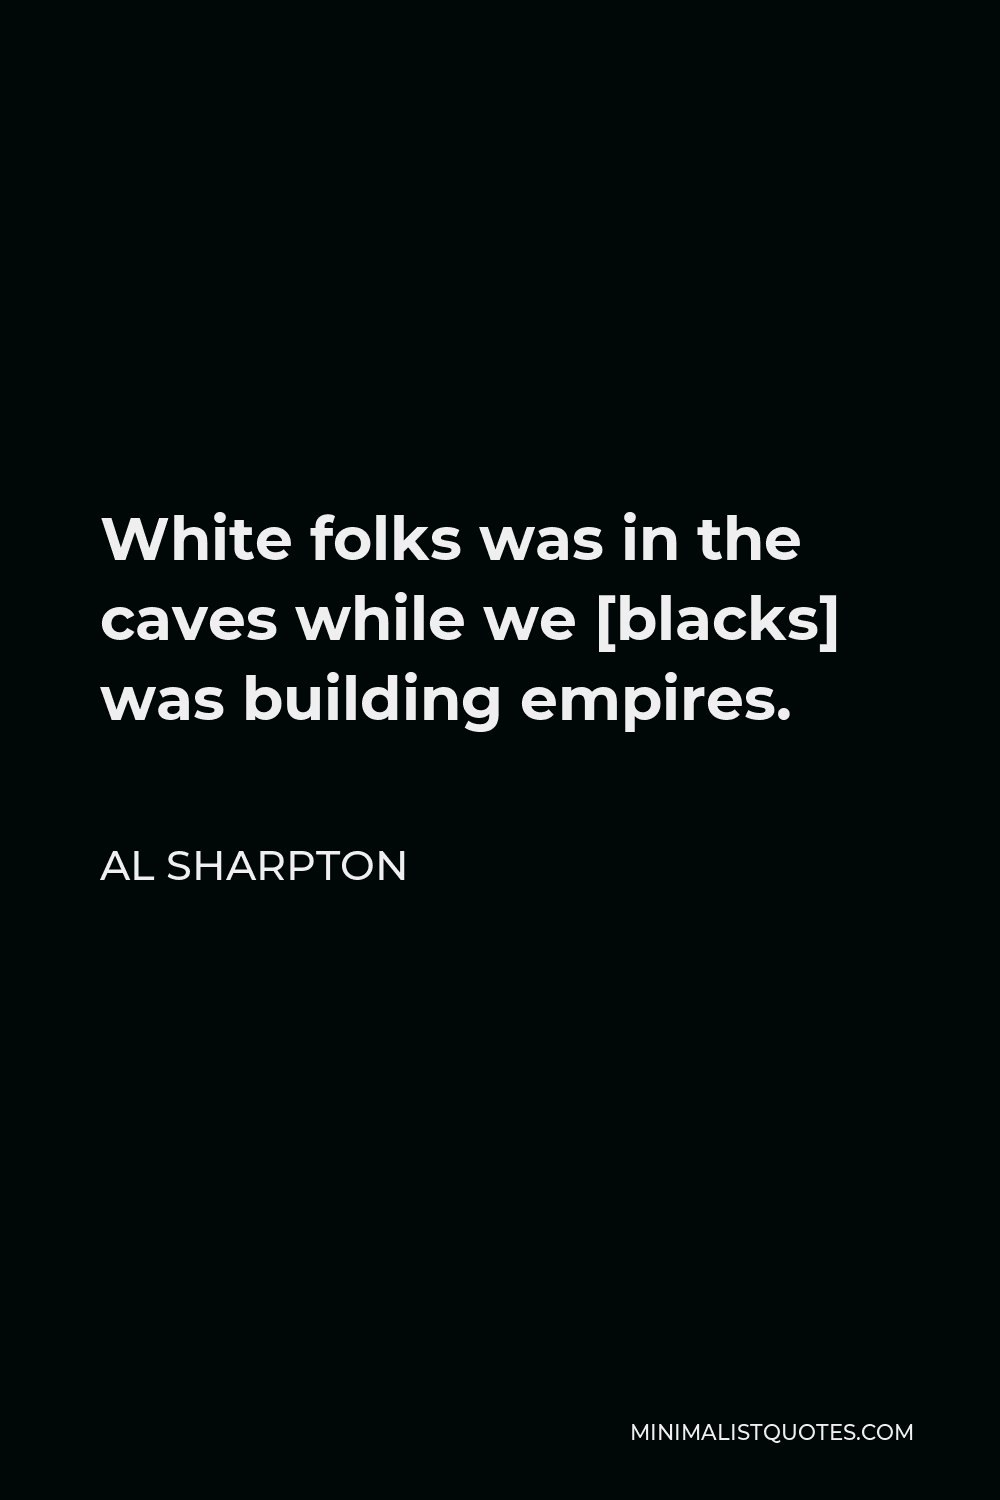 Al Sharpton Quote - White folks was in the caves while we [blacks] was building empires.